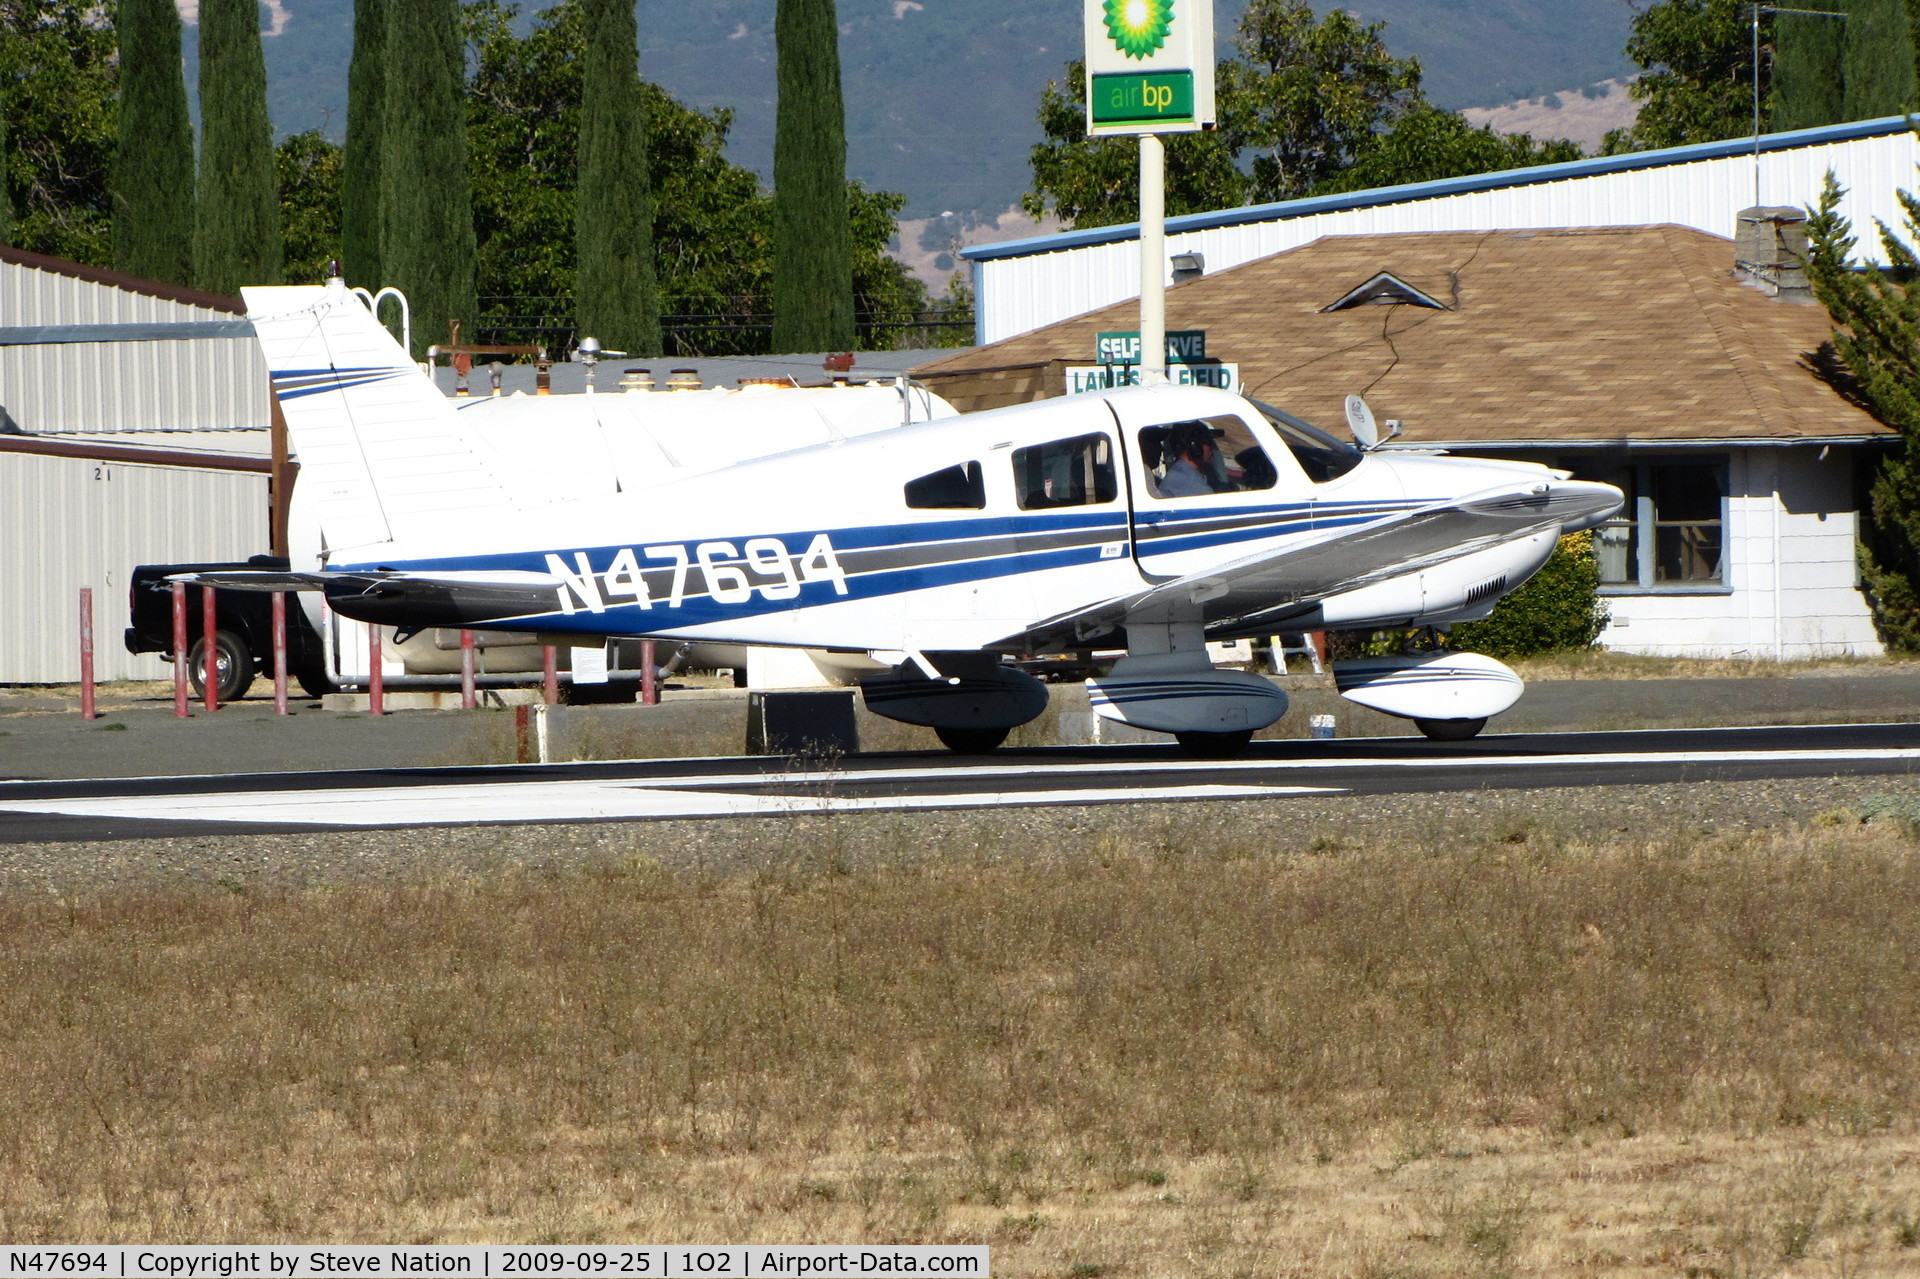 N47694, 1977 Piper PA-28-181 C/N 28-7890119, Locally-based 1977 Piper PA-28-181 rolling out on RWY 10